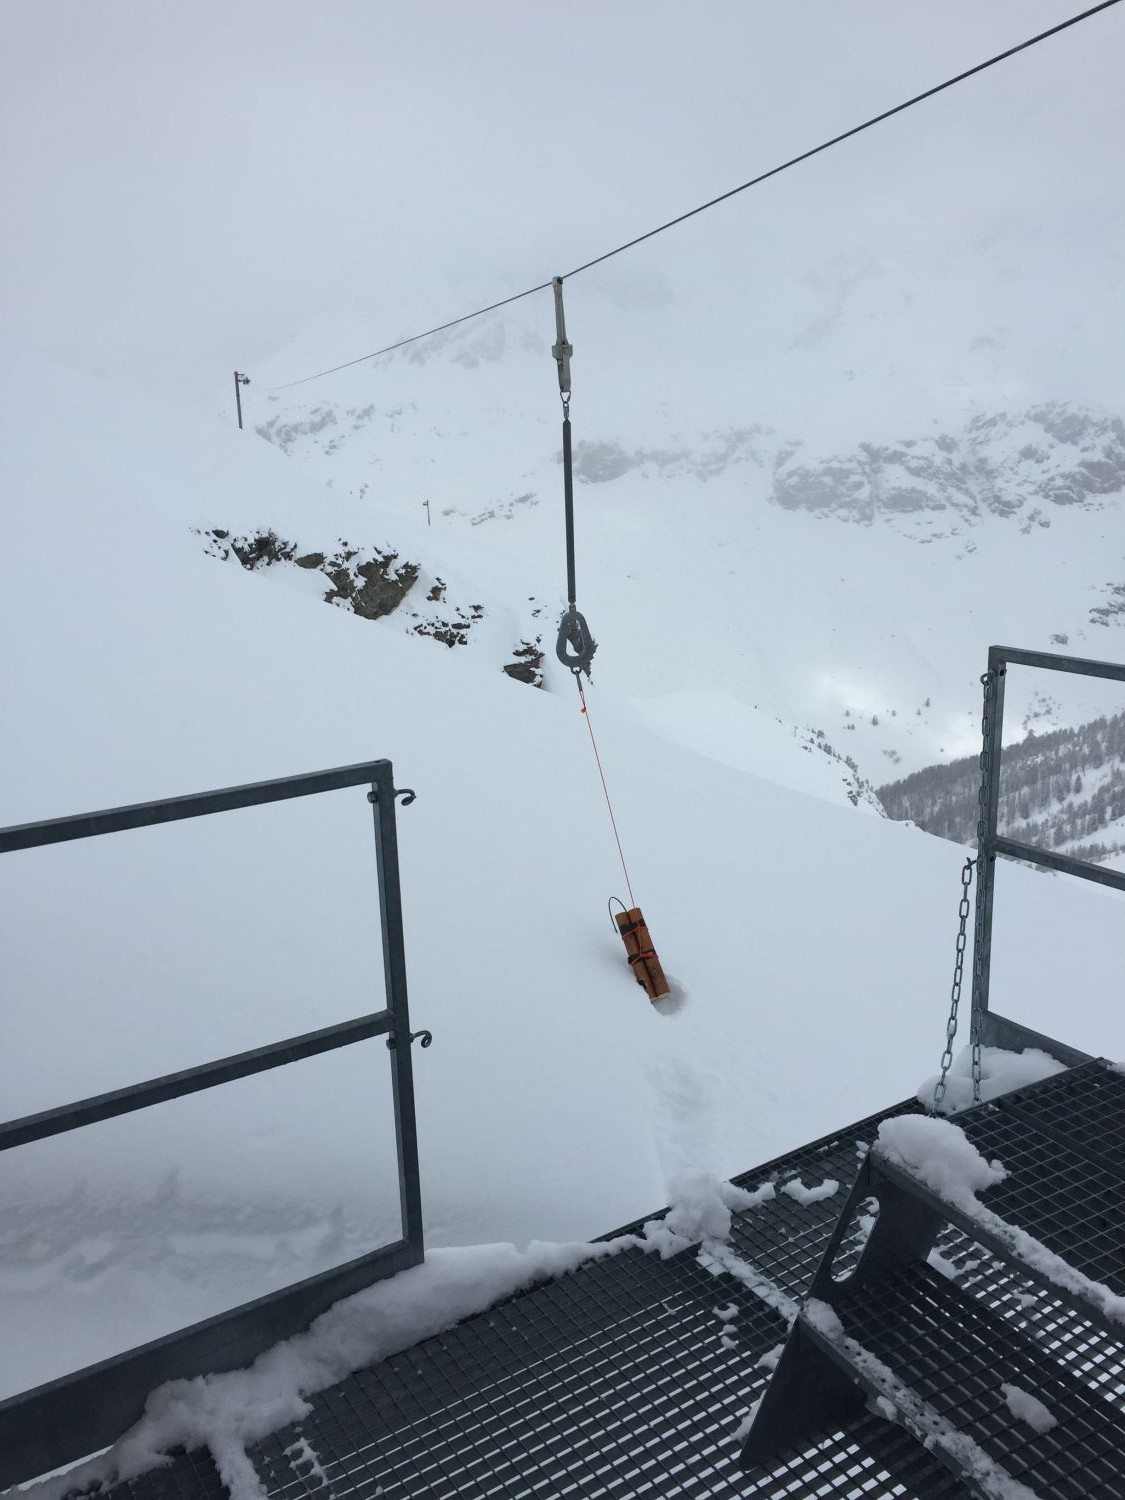 A catex in its rail out of the gare. High prone avalanche terrain